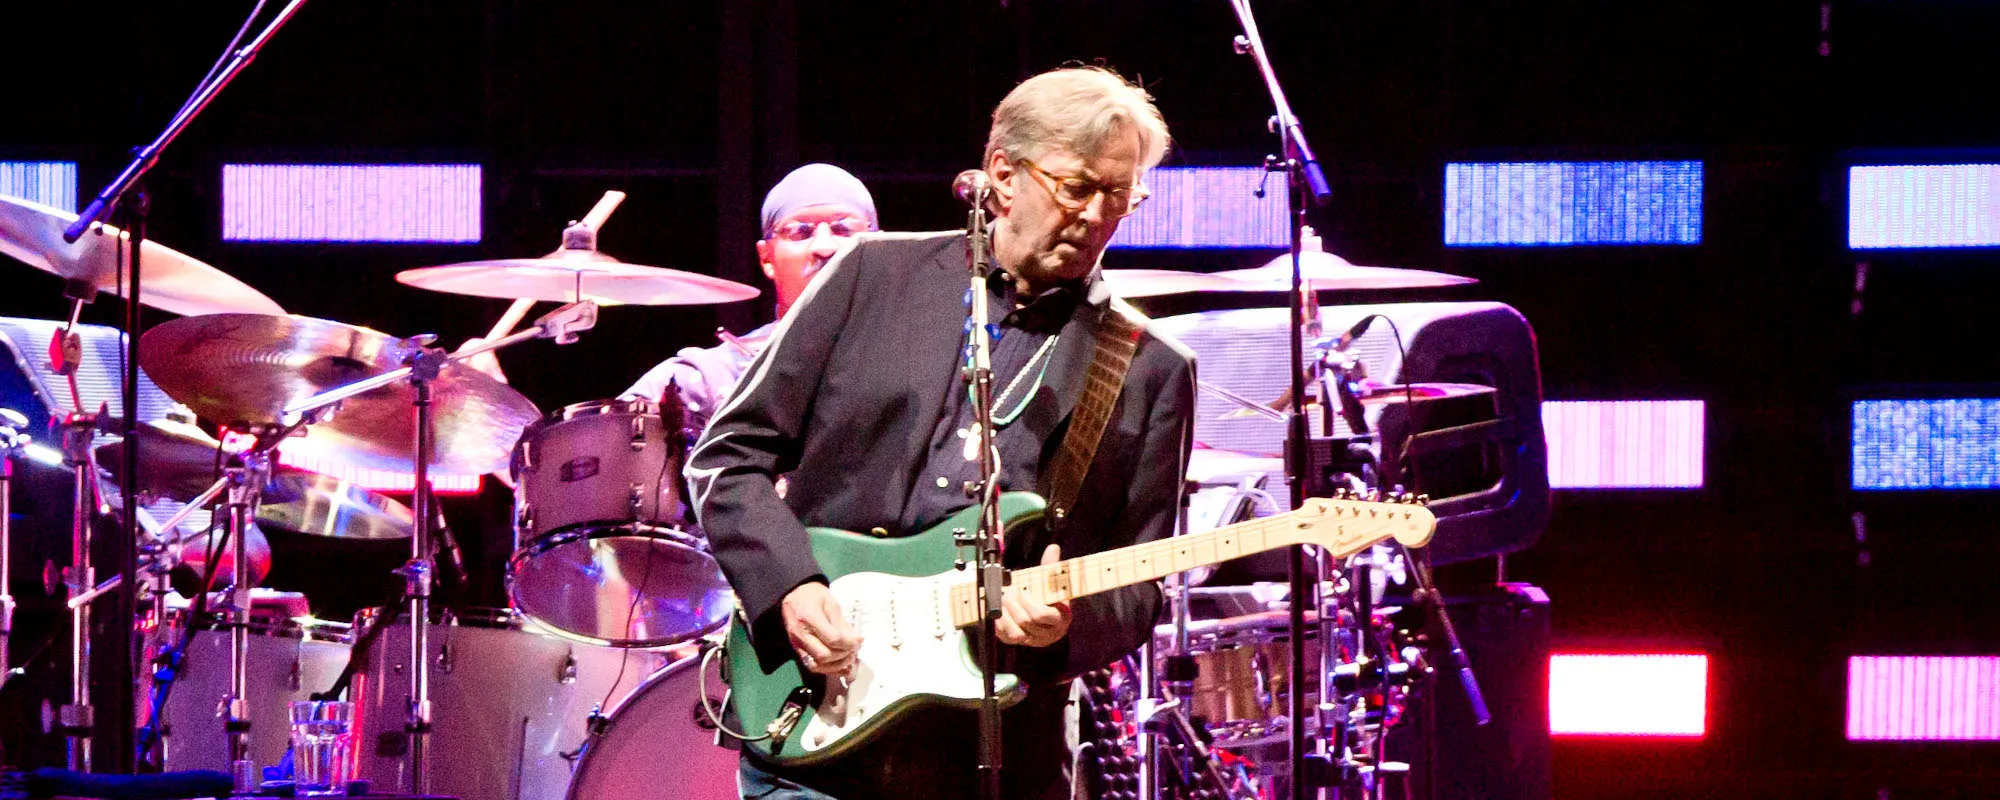 ZZ Top, Sheryl Crow, Buddy Guy Booked for Eric Clapton’s Crossroads Guitar Festival